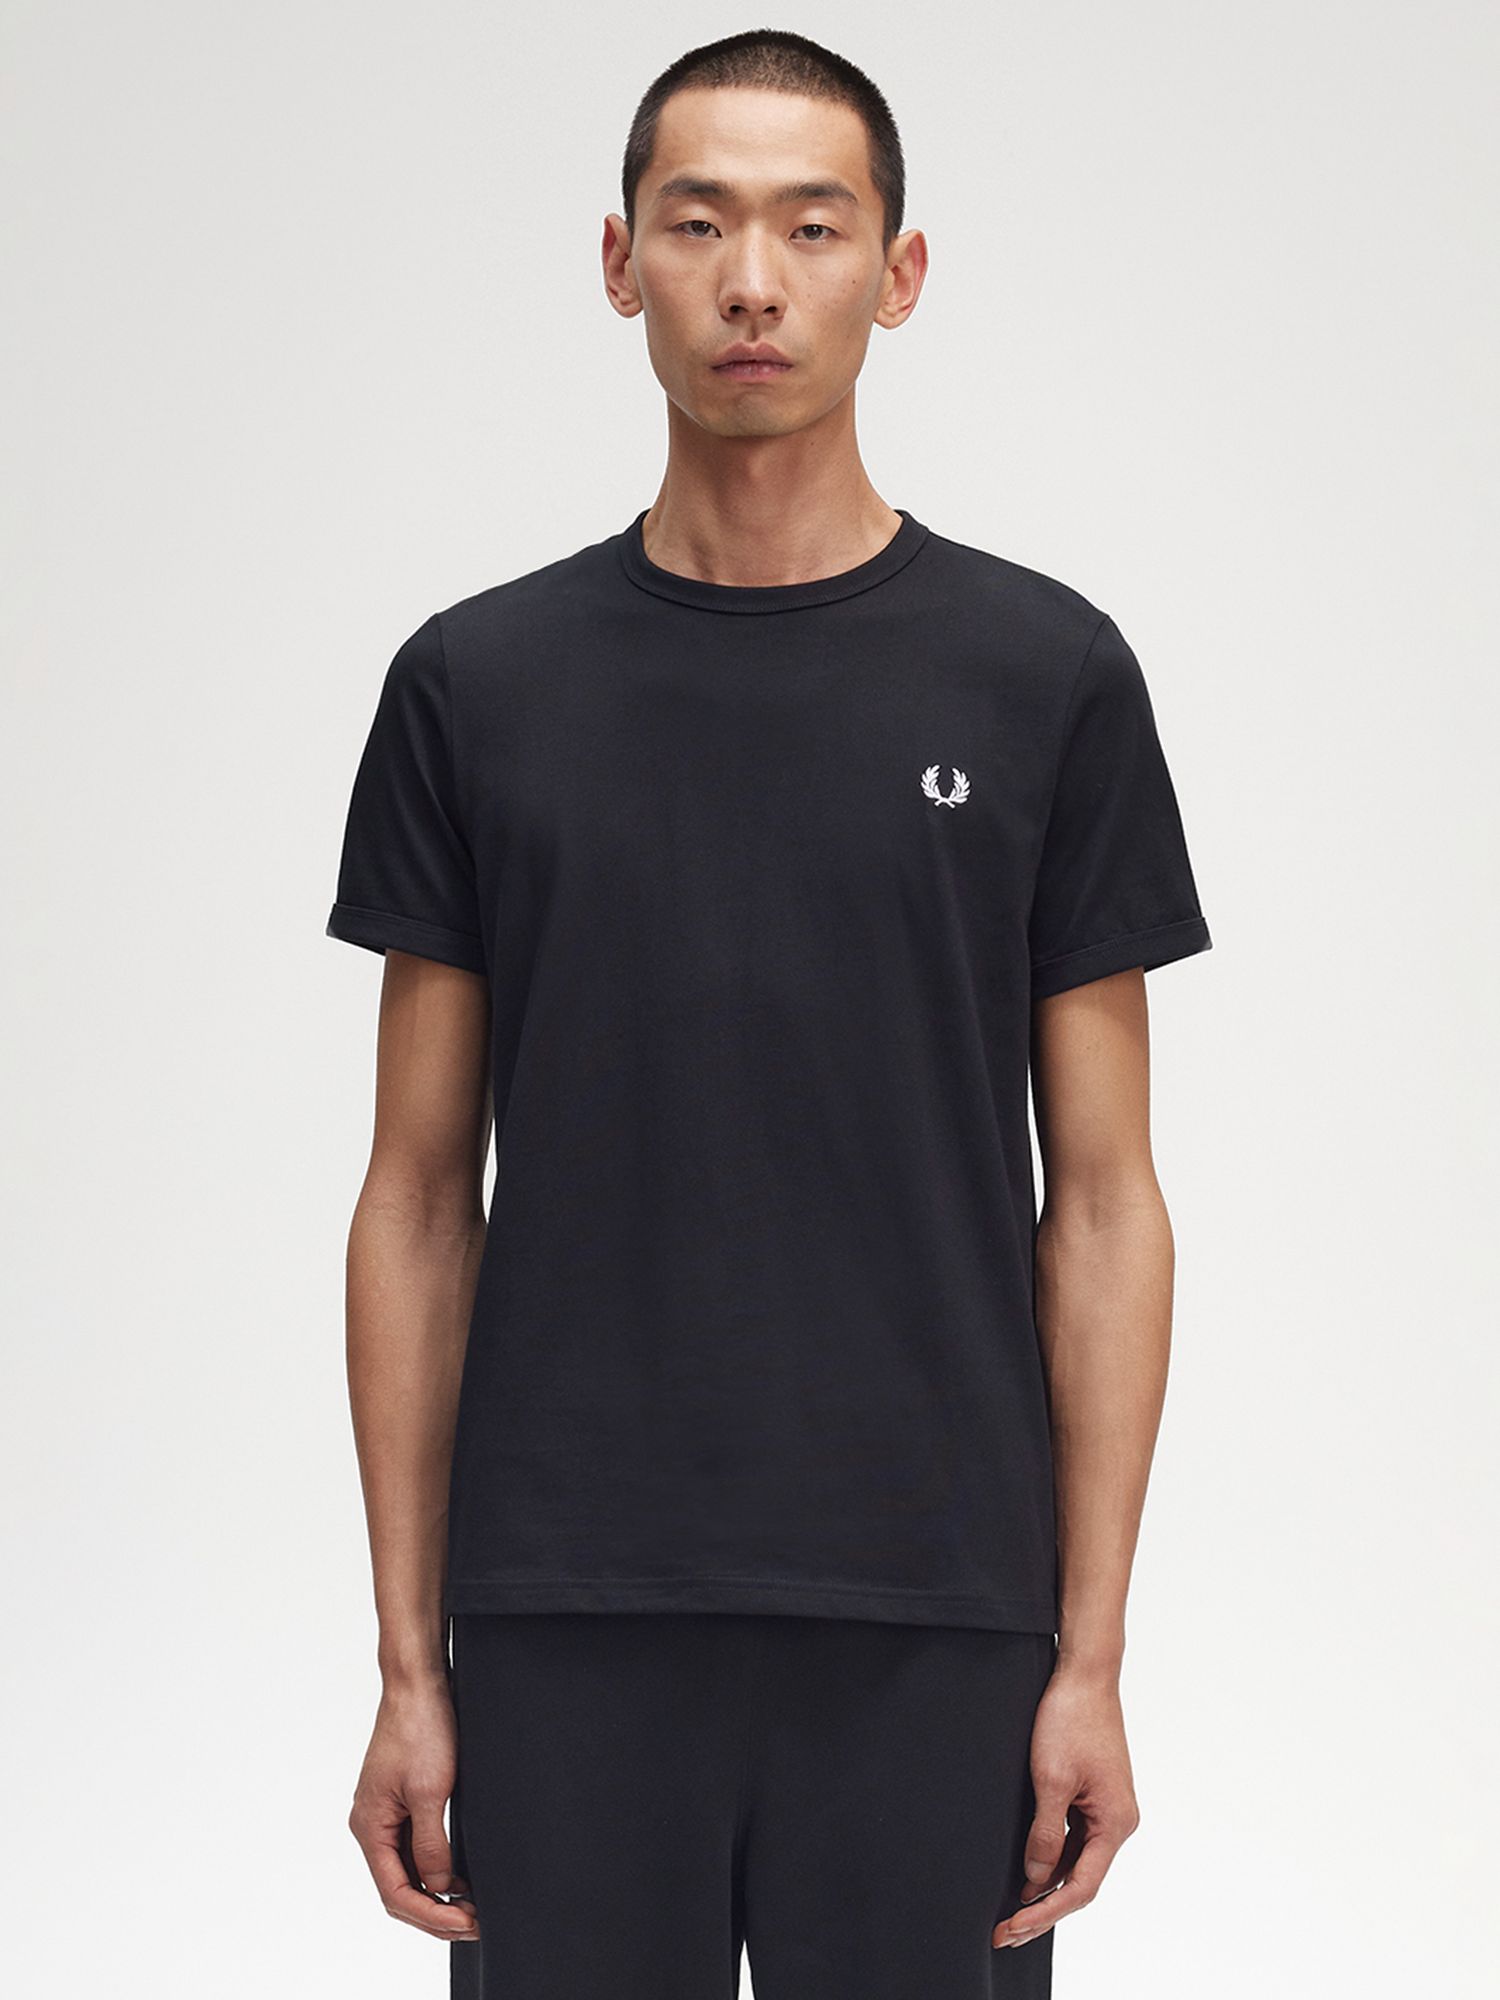 Fred Perry Ringer Crew Neck T-Shirt, Black at John Lewis & Partners